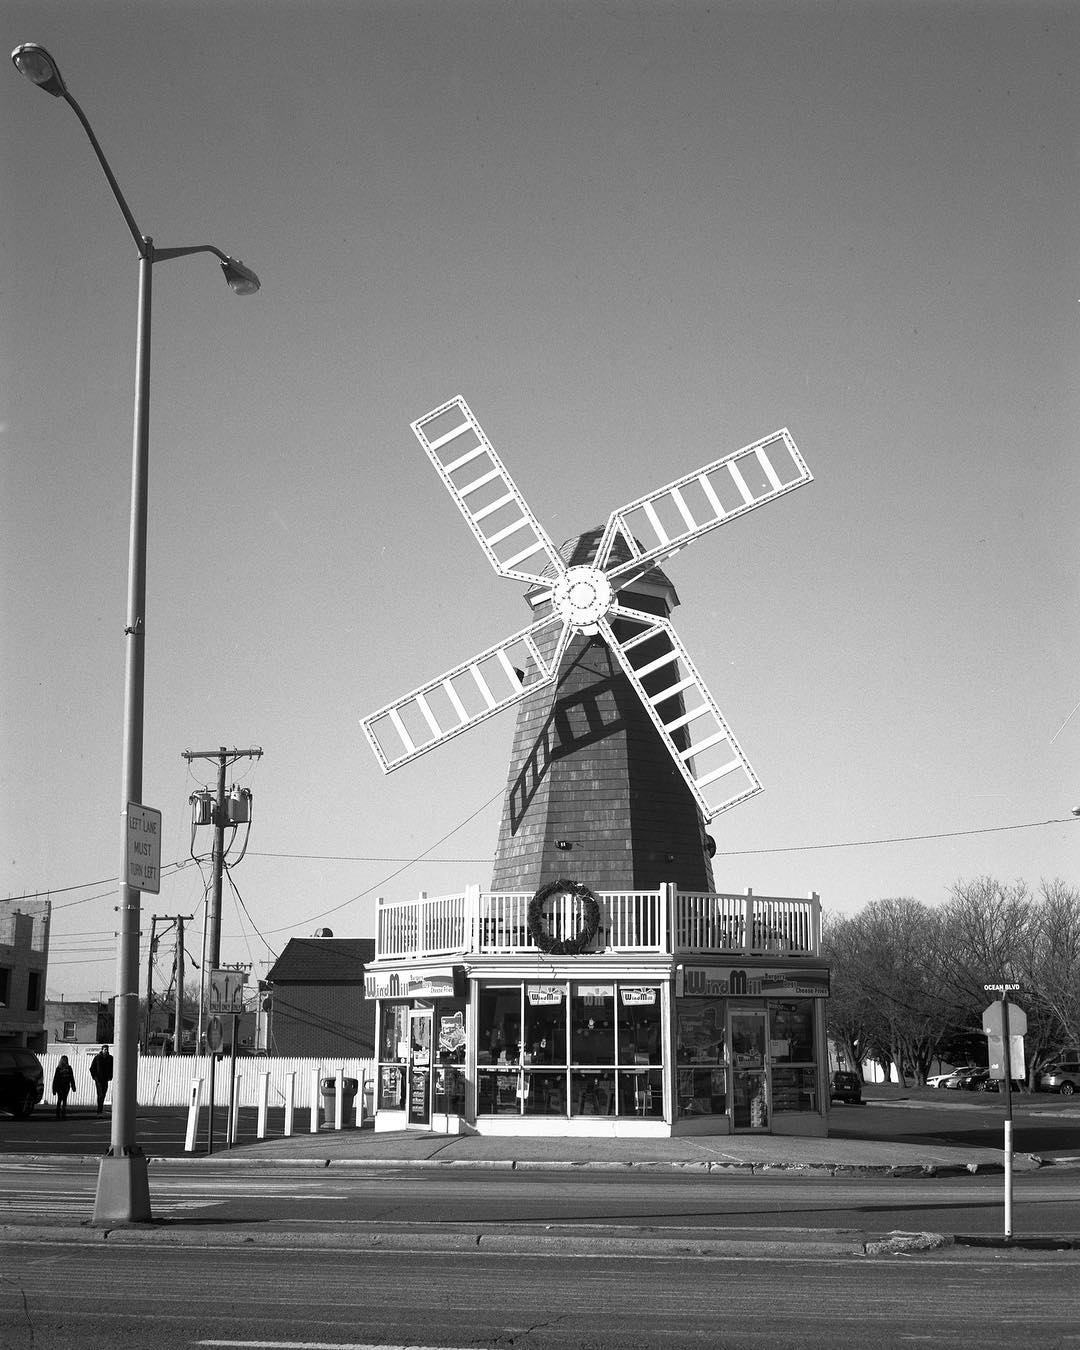 The Windmill is a Jersey Shore institution. And theyâre open year-round. #speedgraphic #largeformat #4x5 #film #filmphotography #filmphotographic #filmisnotdead #itjustsmellsfunny #rodinal